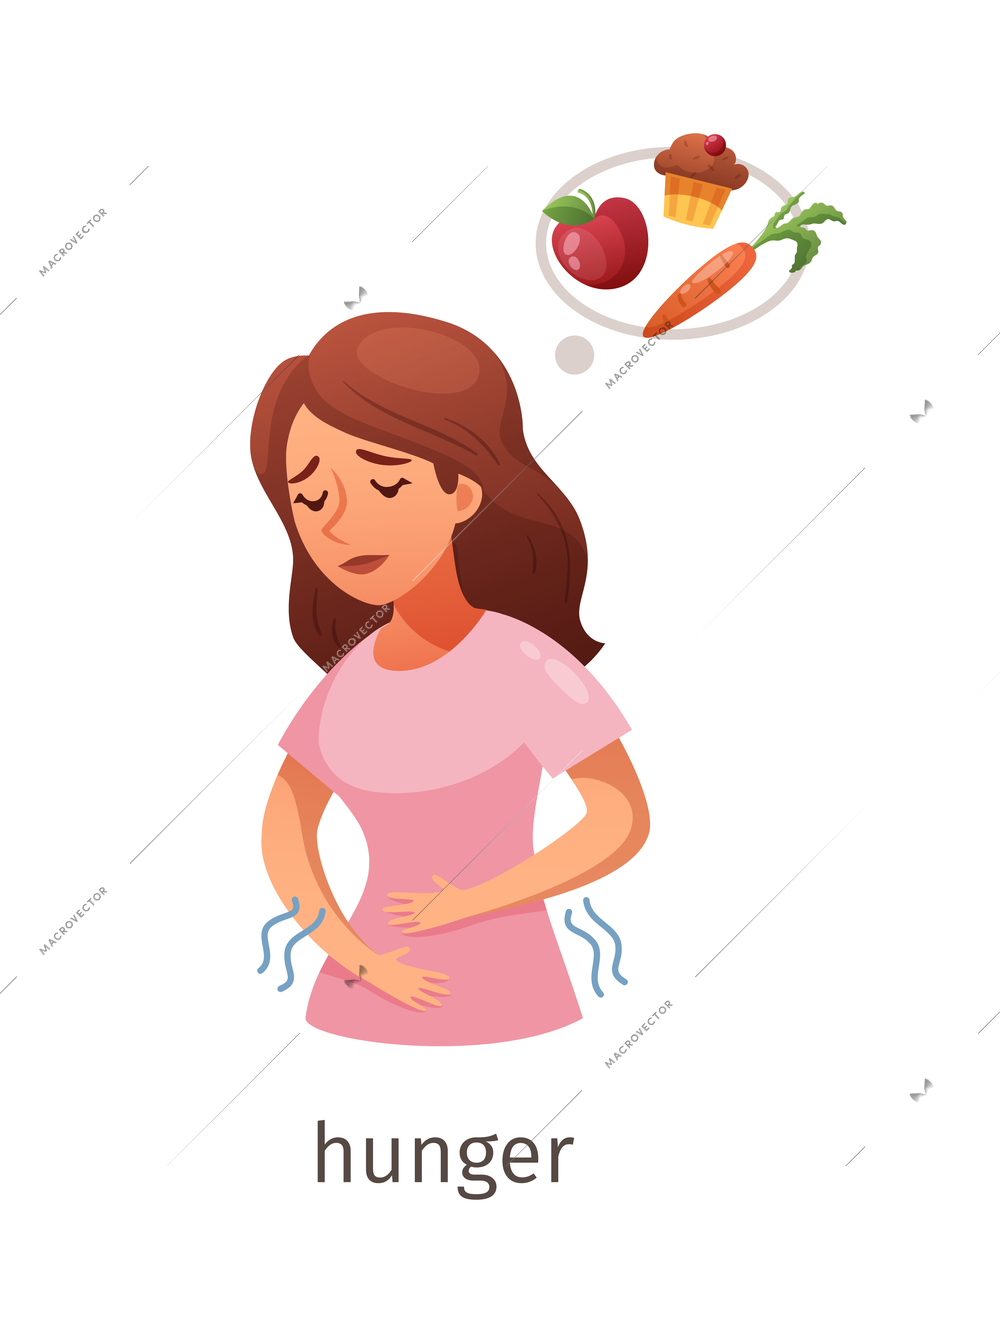 Diabetes cartoon composition with character of sick woman suffering from hunger vector illustration